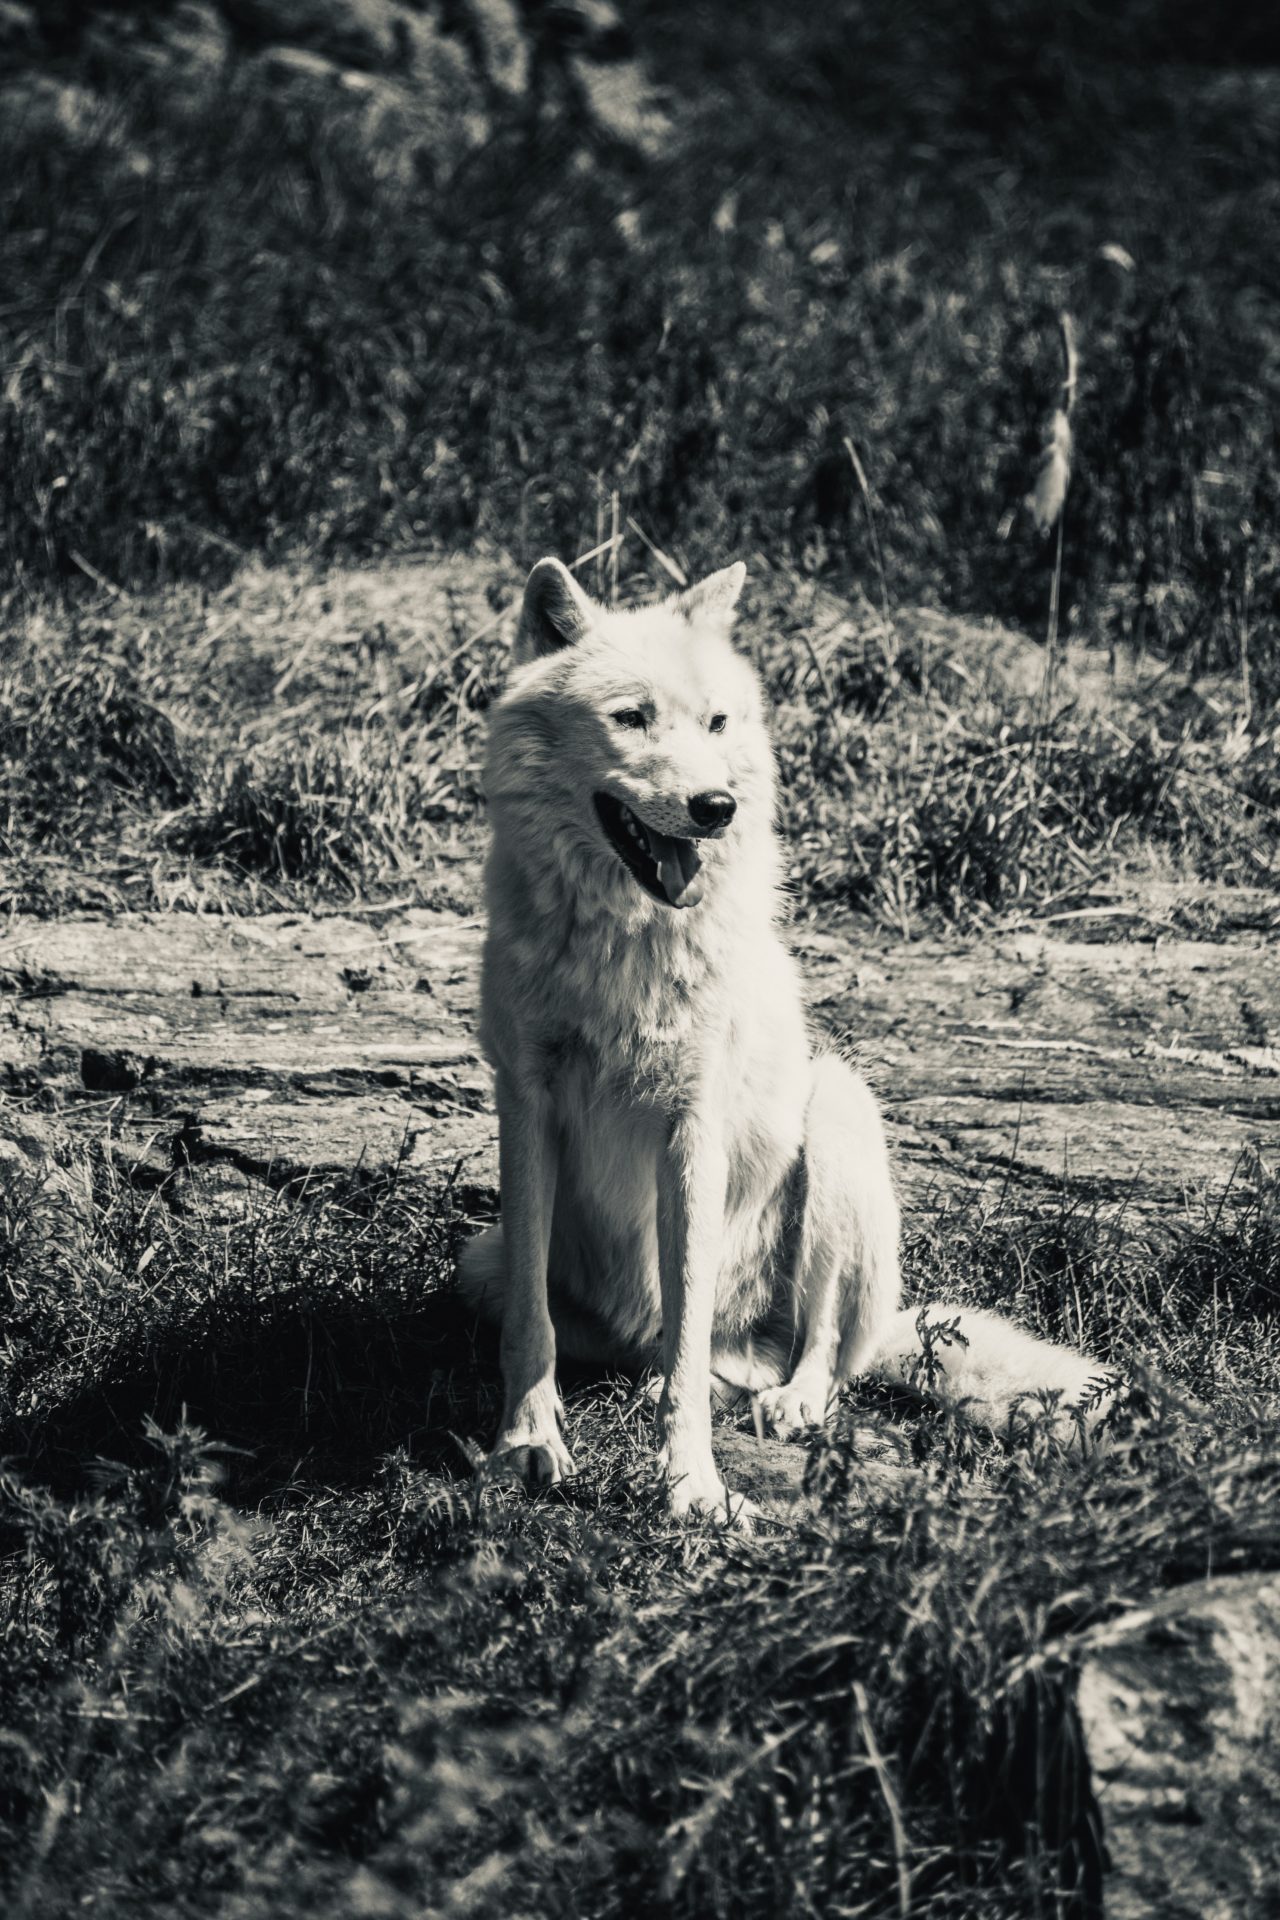 https://educfrance.org/wp-content/uploads/2020/05/white-wolf-in-the-wild-1-1280x1920.jpg